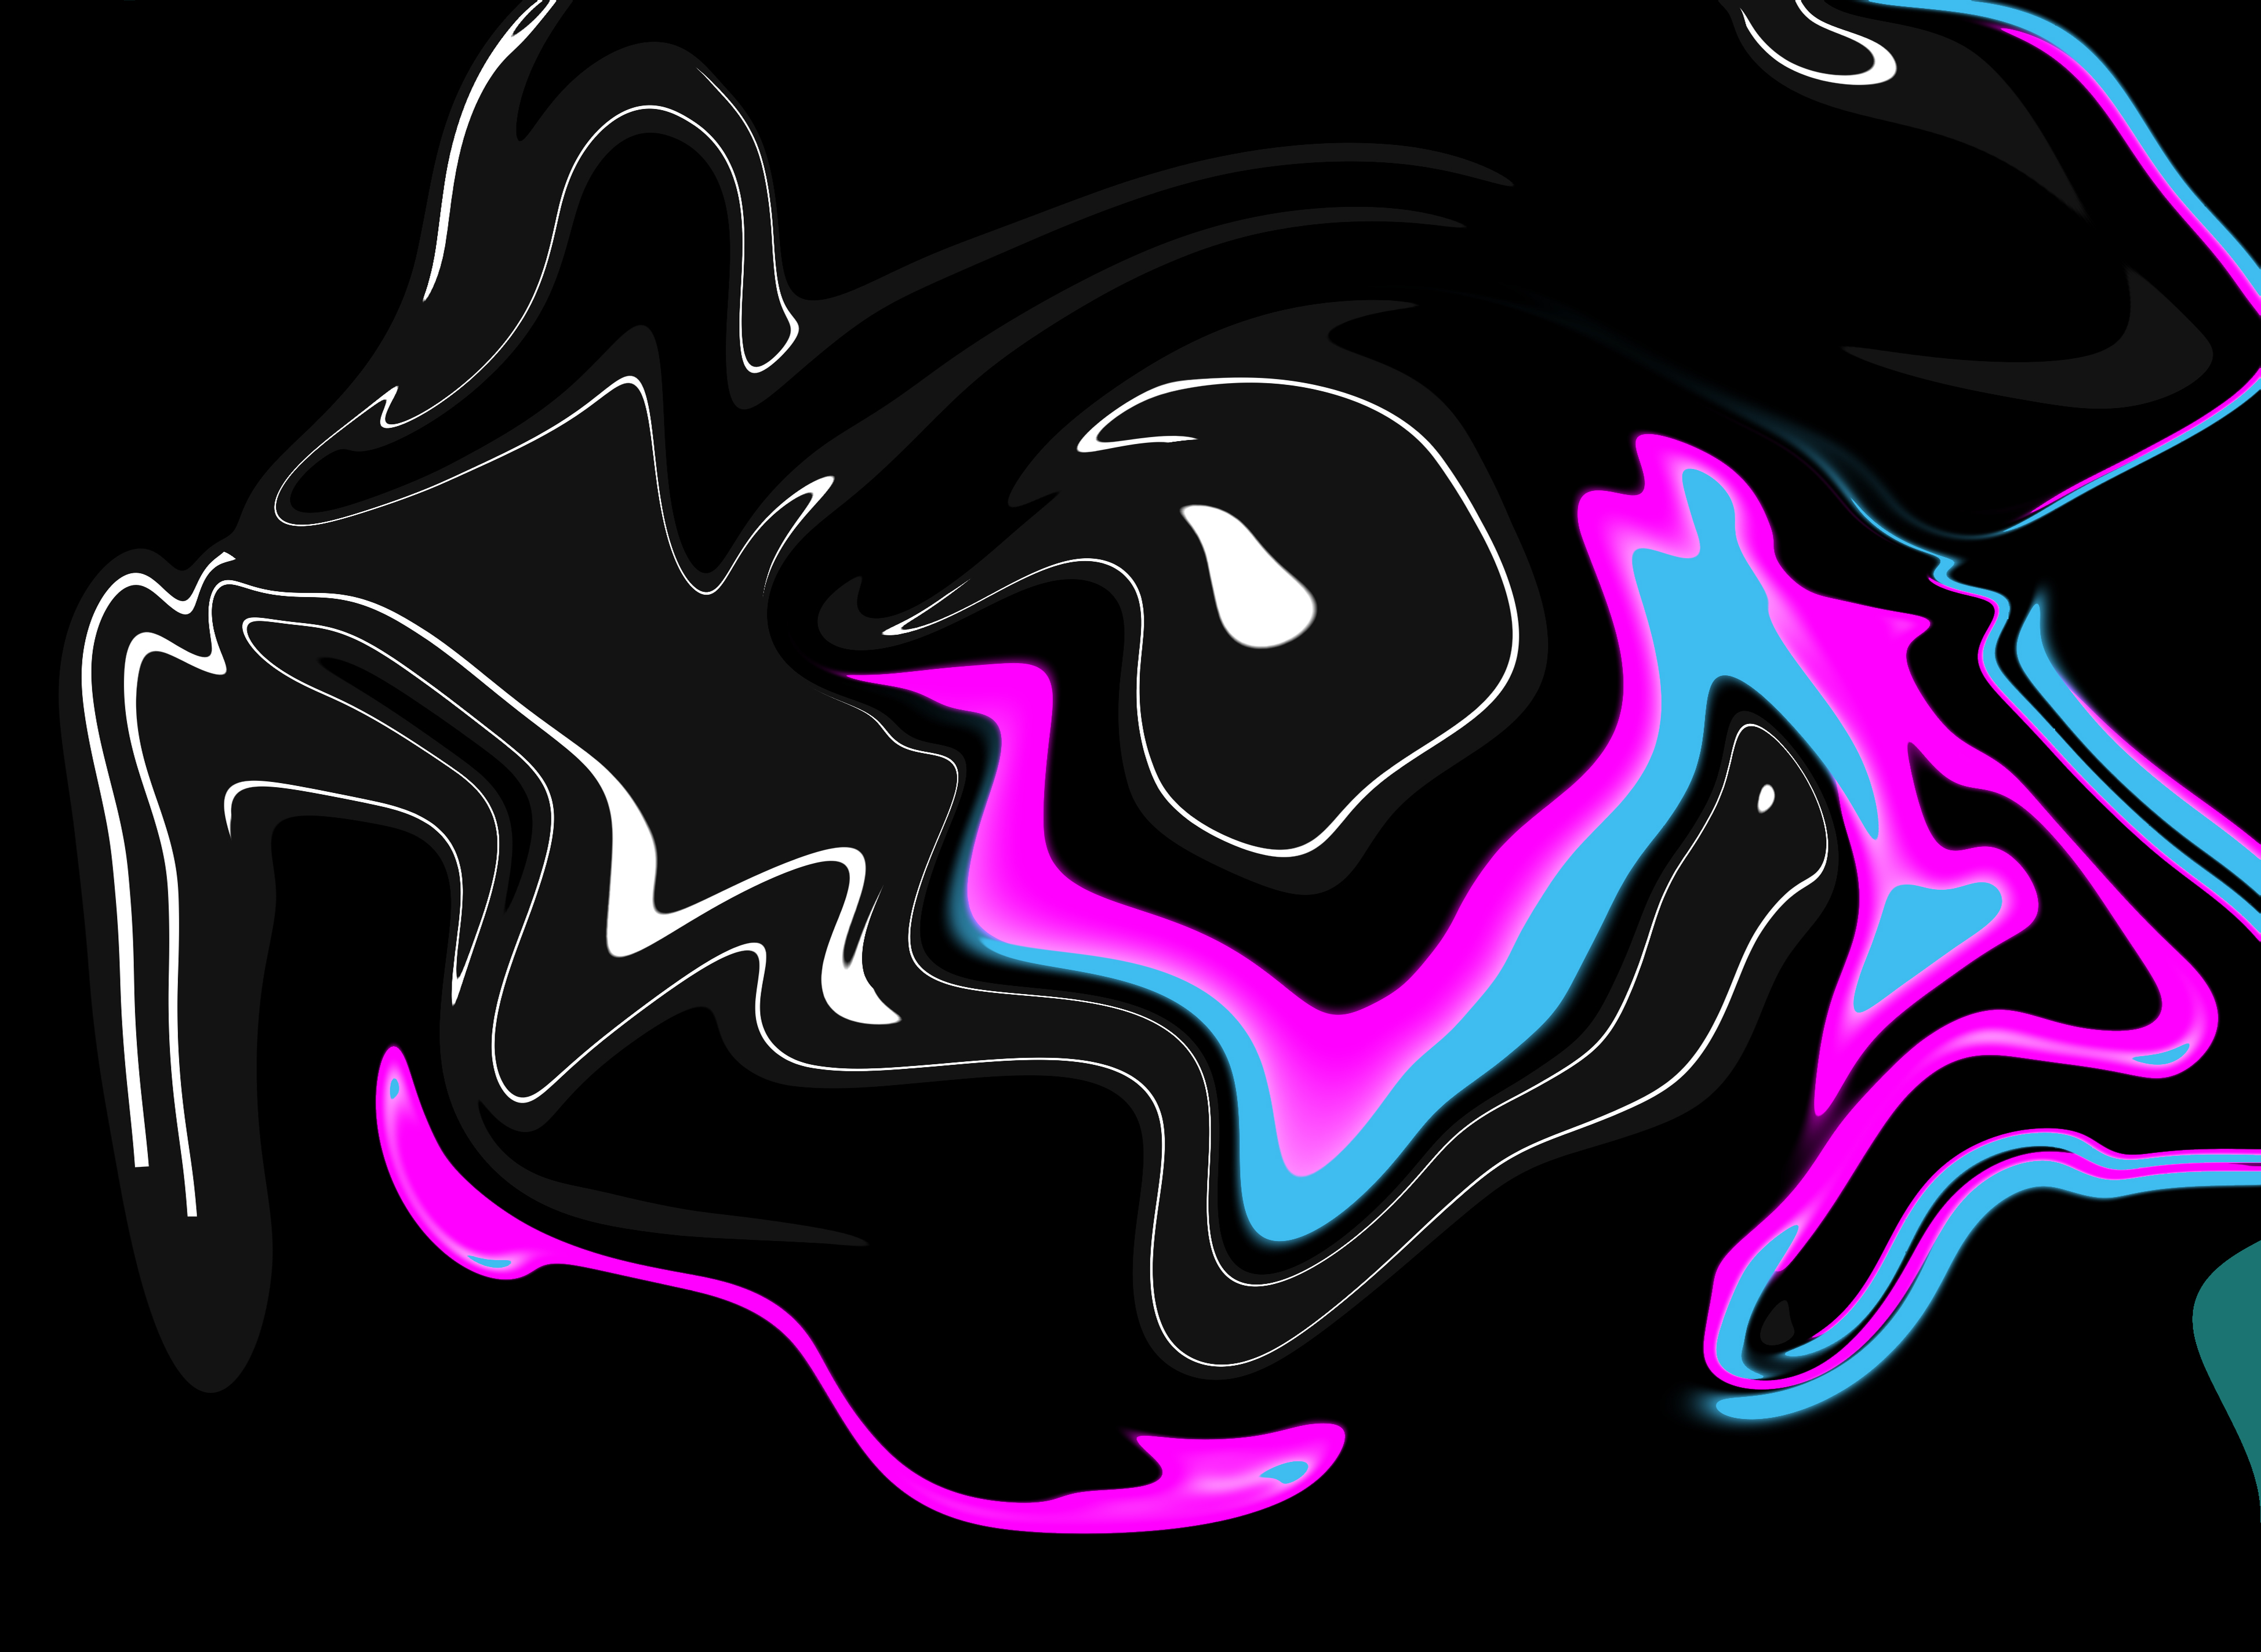 General 3900x2850 abstract neon shapes swirls black background simple background artwork